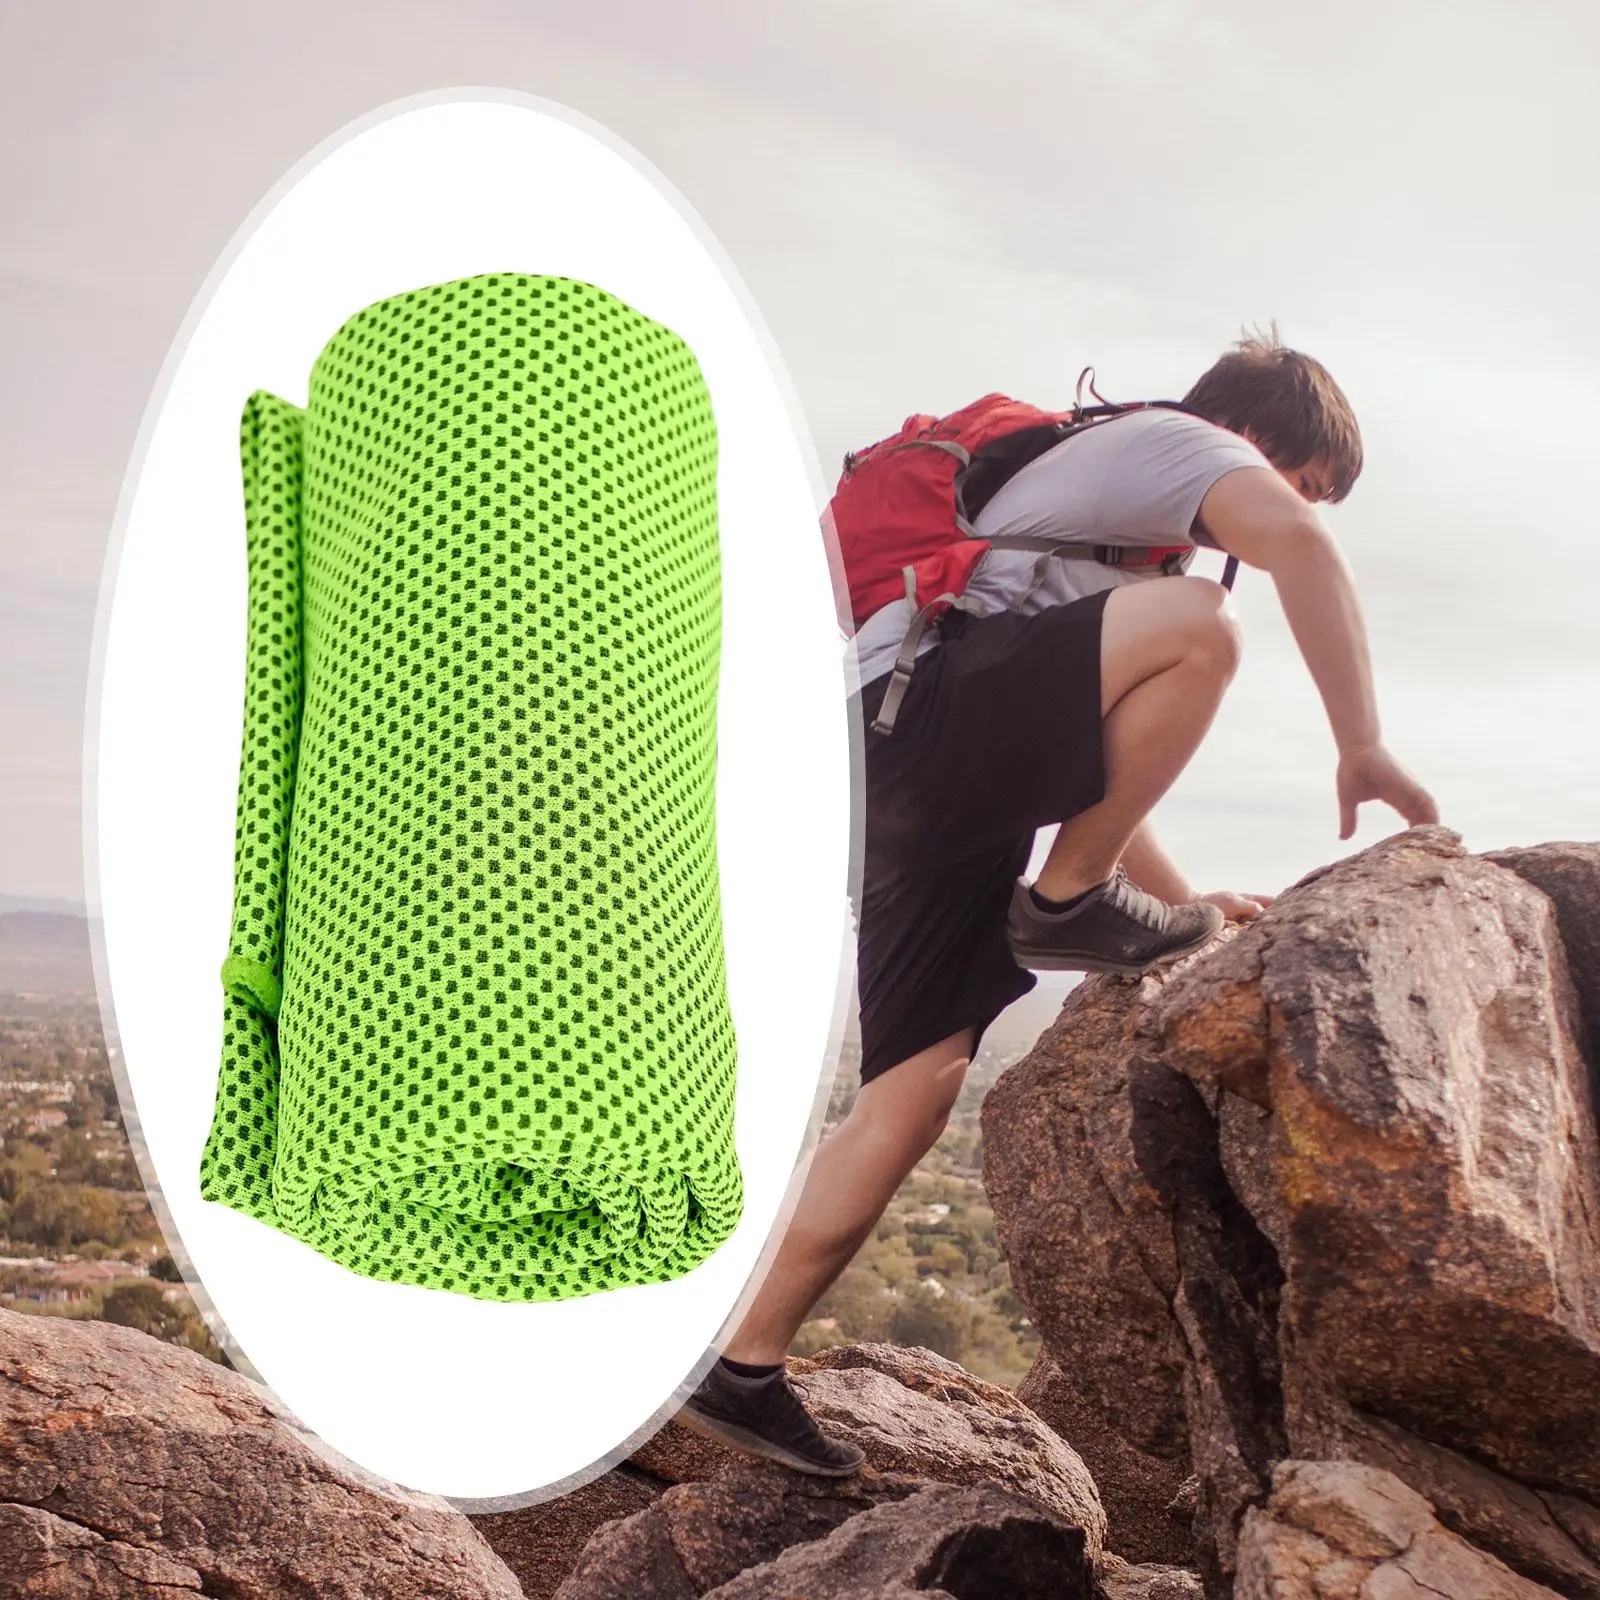 Cool Towel Sweat Absorbing 30x80cm/12inchx32inch for Hot Weather Soft Chilly Towel for Hiking Yoga Football Camping Fitness